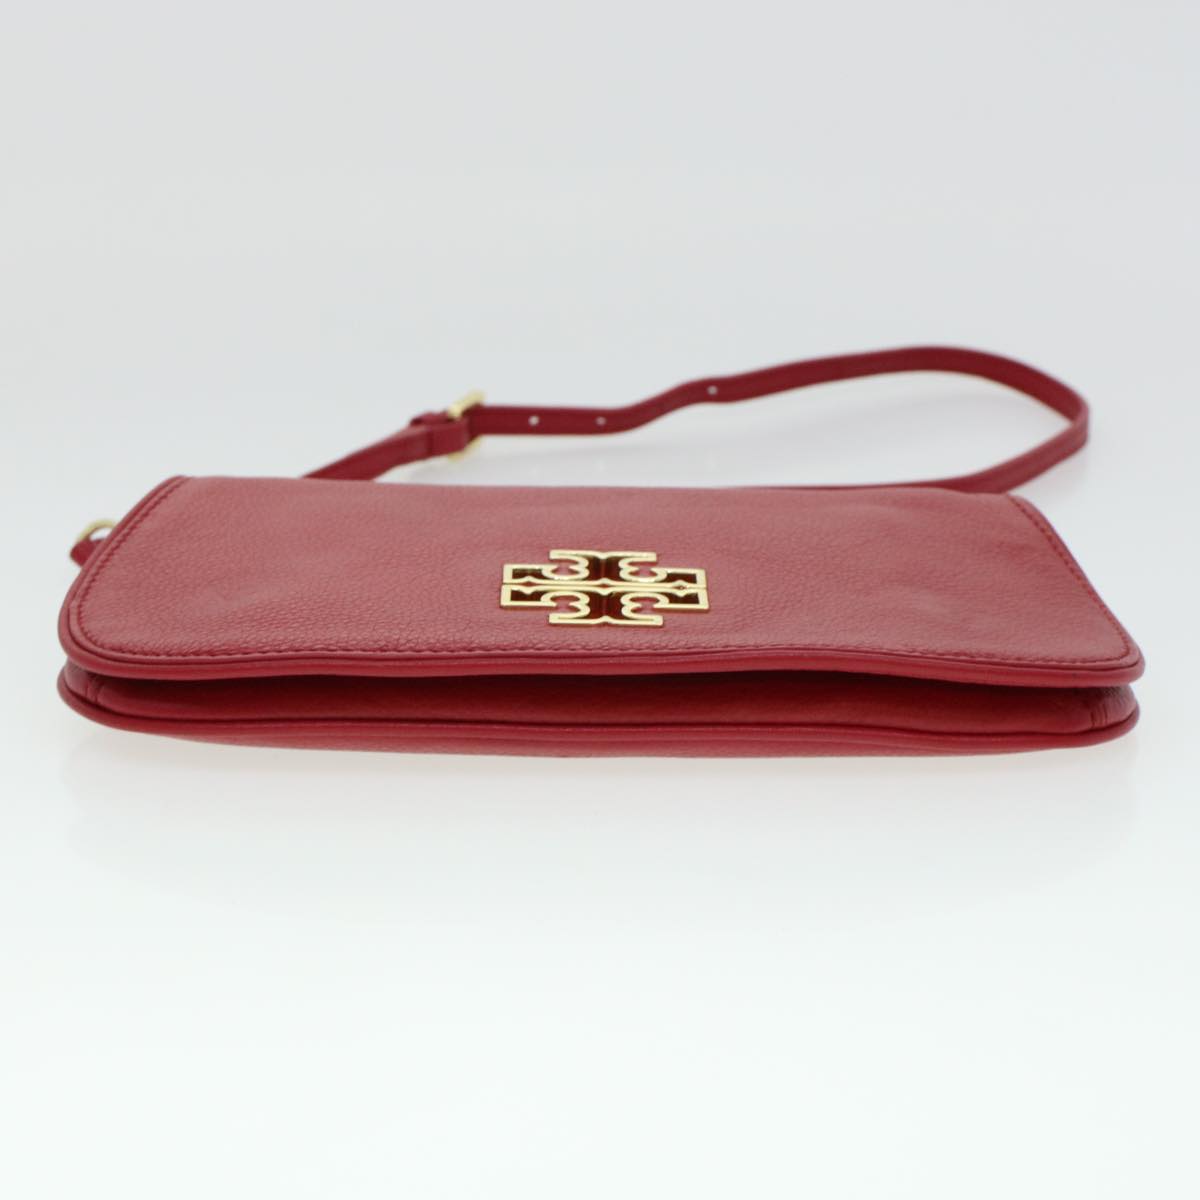 TORY BURCH Chain Shoulder Bag Leather Red HSP037 Auth am4539